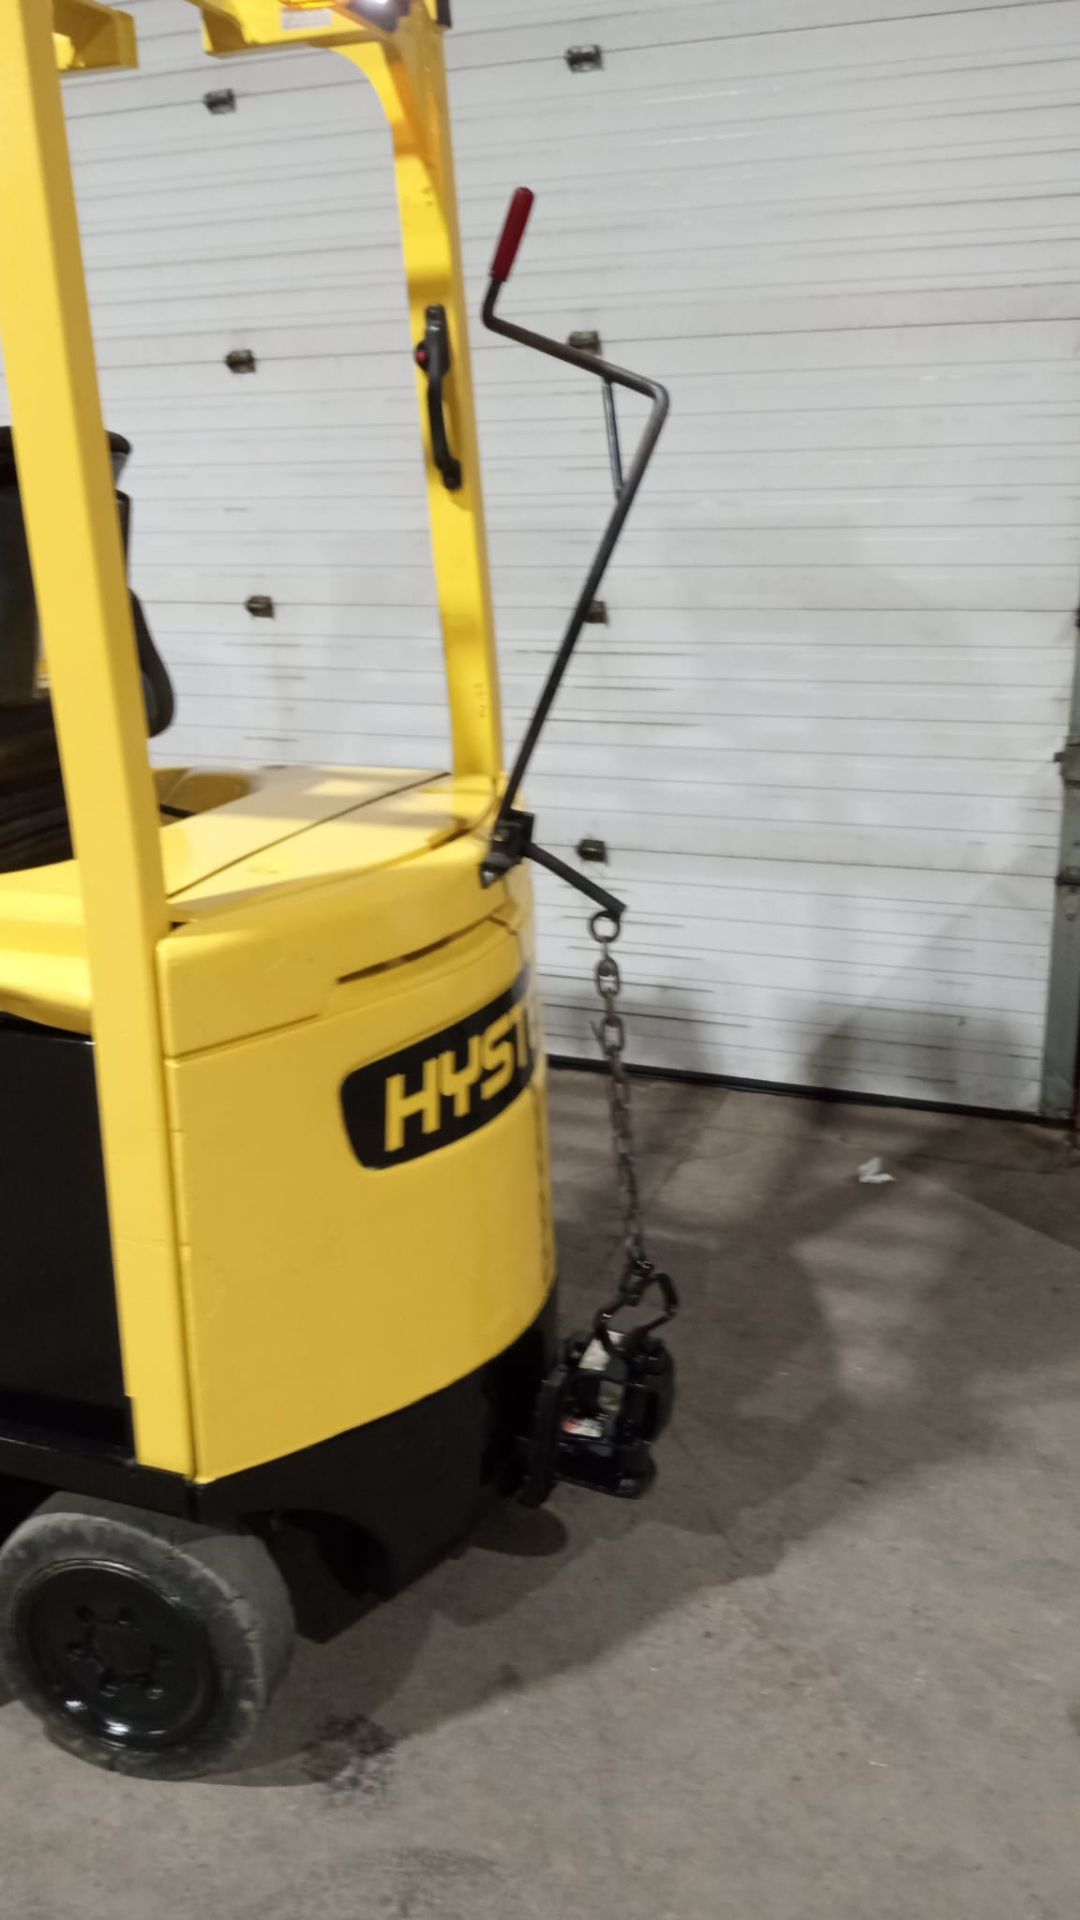 2018 Hyster 5000lbs Capacity Forklift Electric with 48v - 3-STAGE MAST with Sideshift with trailer - Bild 3 aus 5